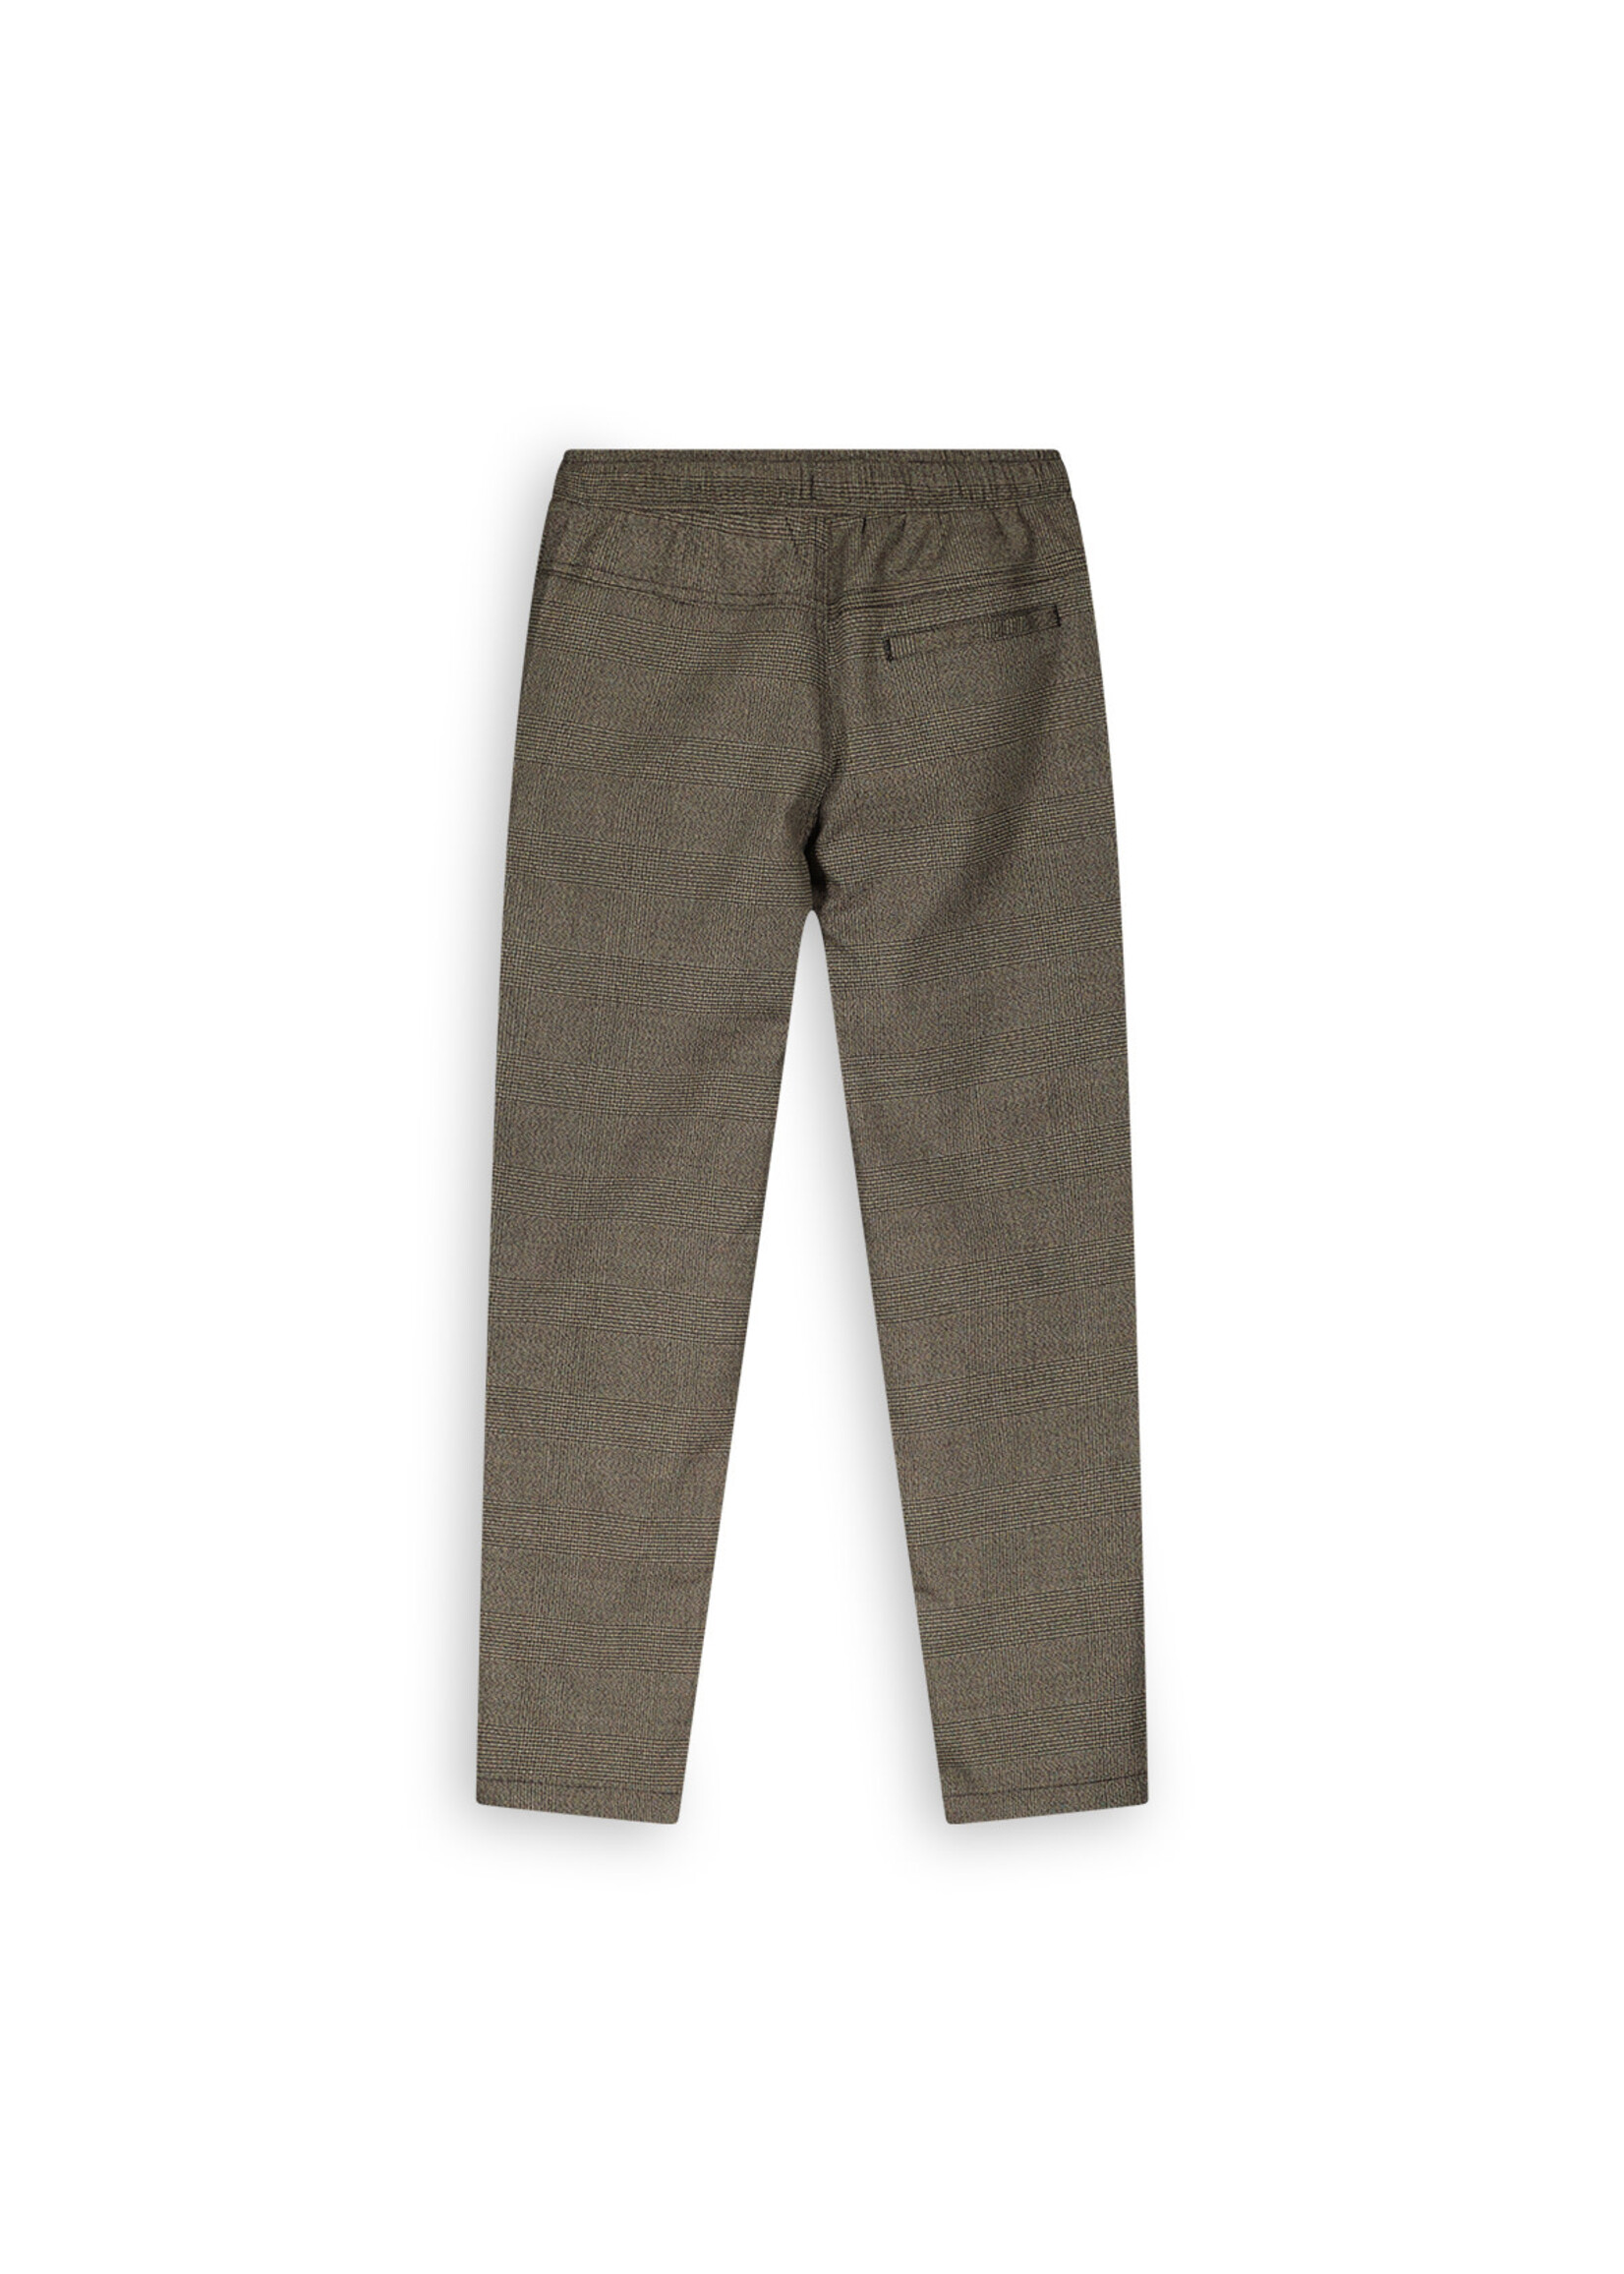 Bellaire Bellaire Woven check trouser B308-4603 Brownie